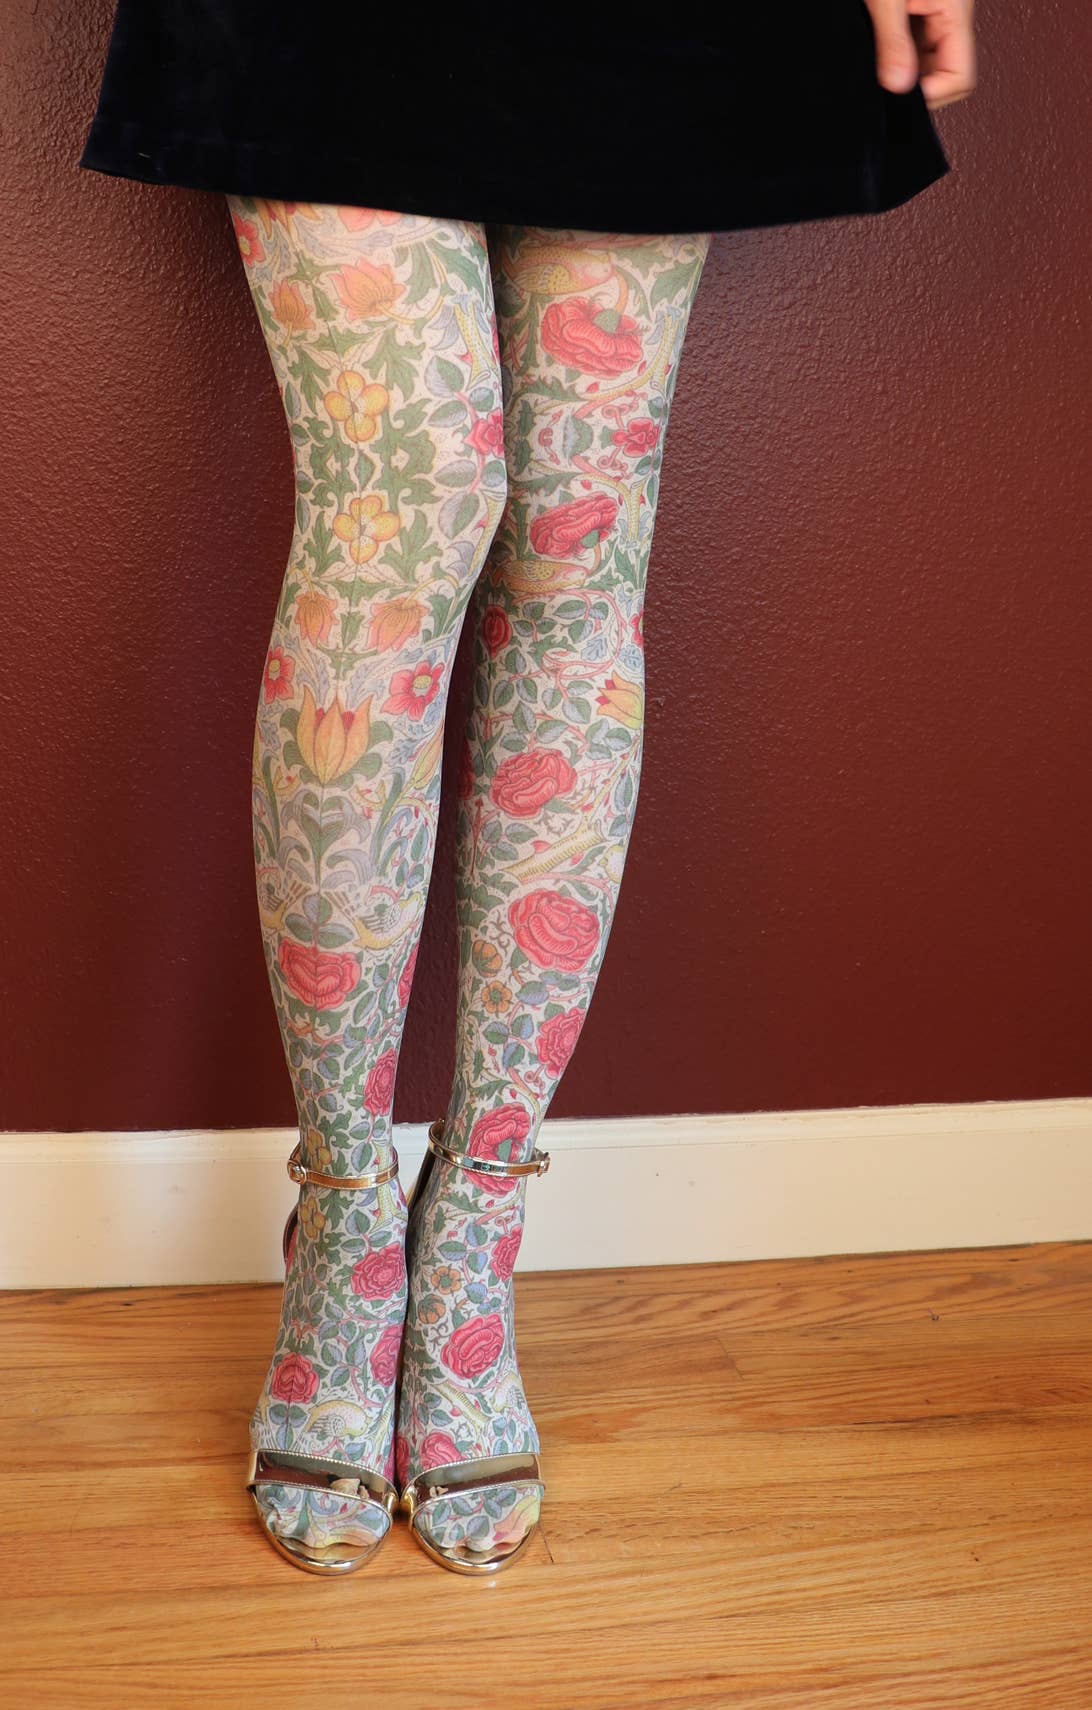 ROSE by WILLIAM MORRIS Printed Art Tights - Out of the Blue